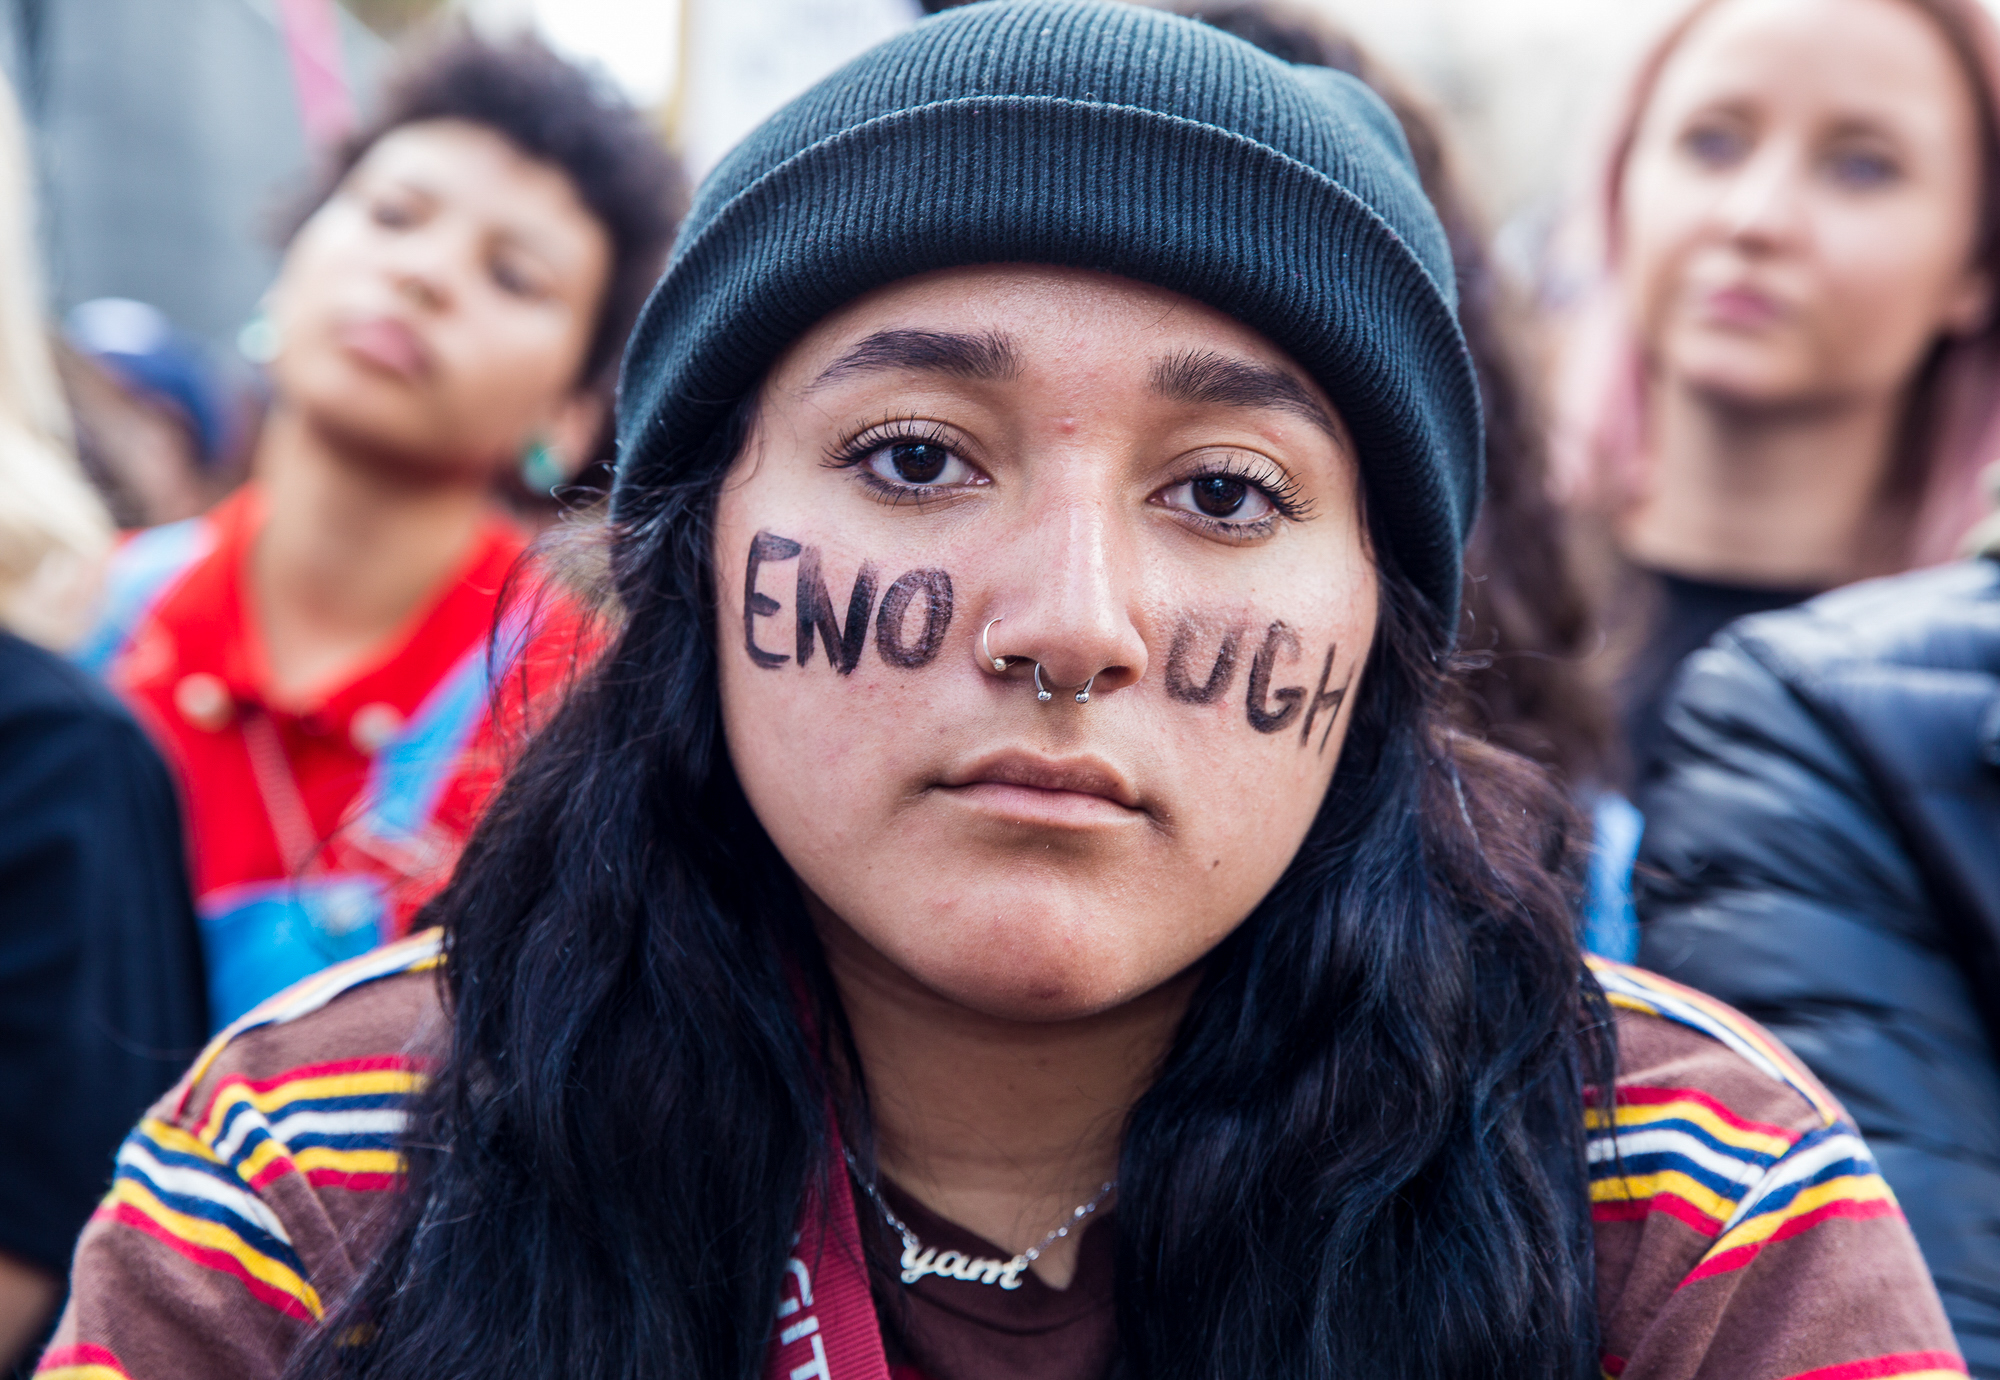  High School student Sabrinah Lopez, 17, attends the March for Our Lives protest with the words “enough” written across her cheeks, listening to key speakers voice their opinion on gun regulation in front of Los Angeles City Hall in Downtown Los Ange